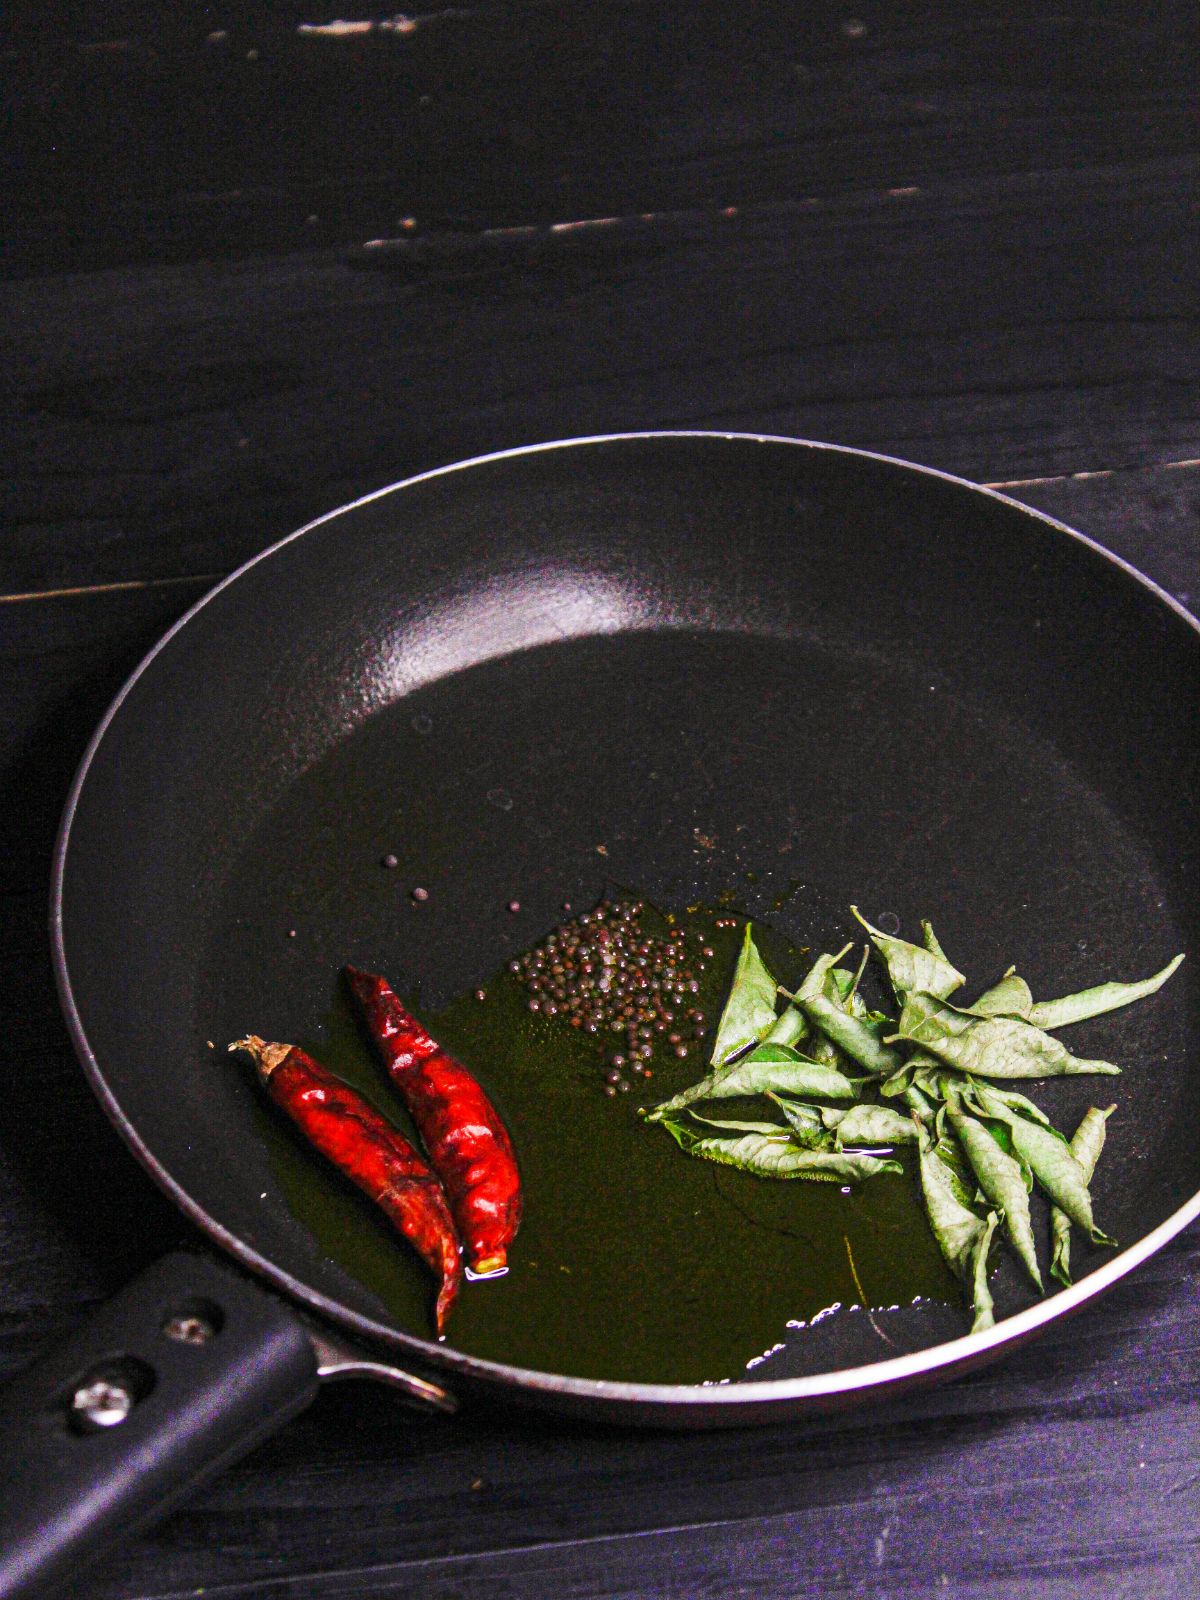 Take oil, curry leaves, red chili and cumin seeds in a pan and saute